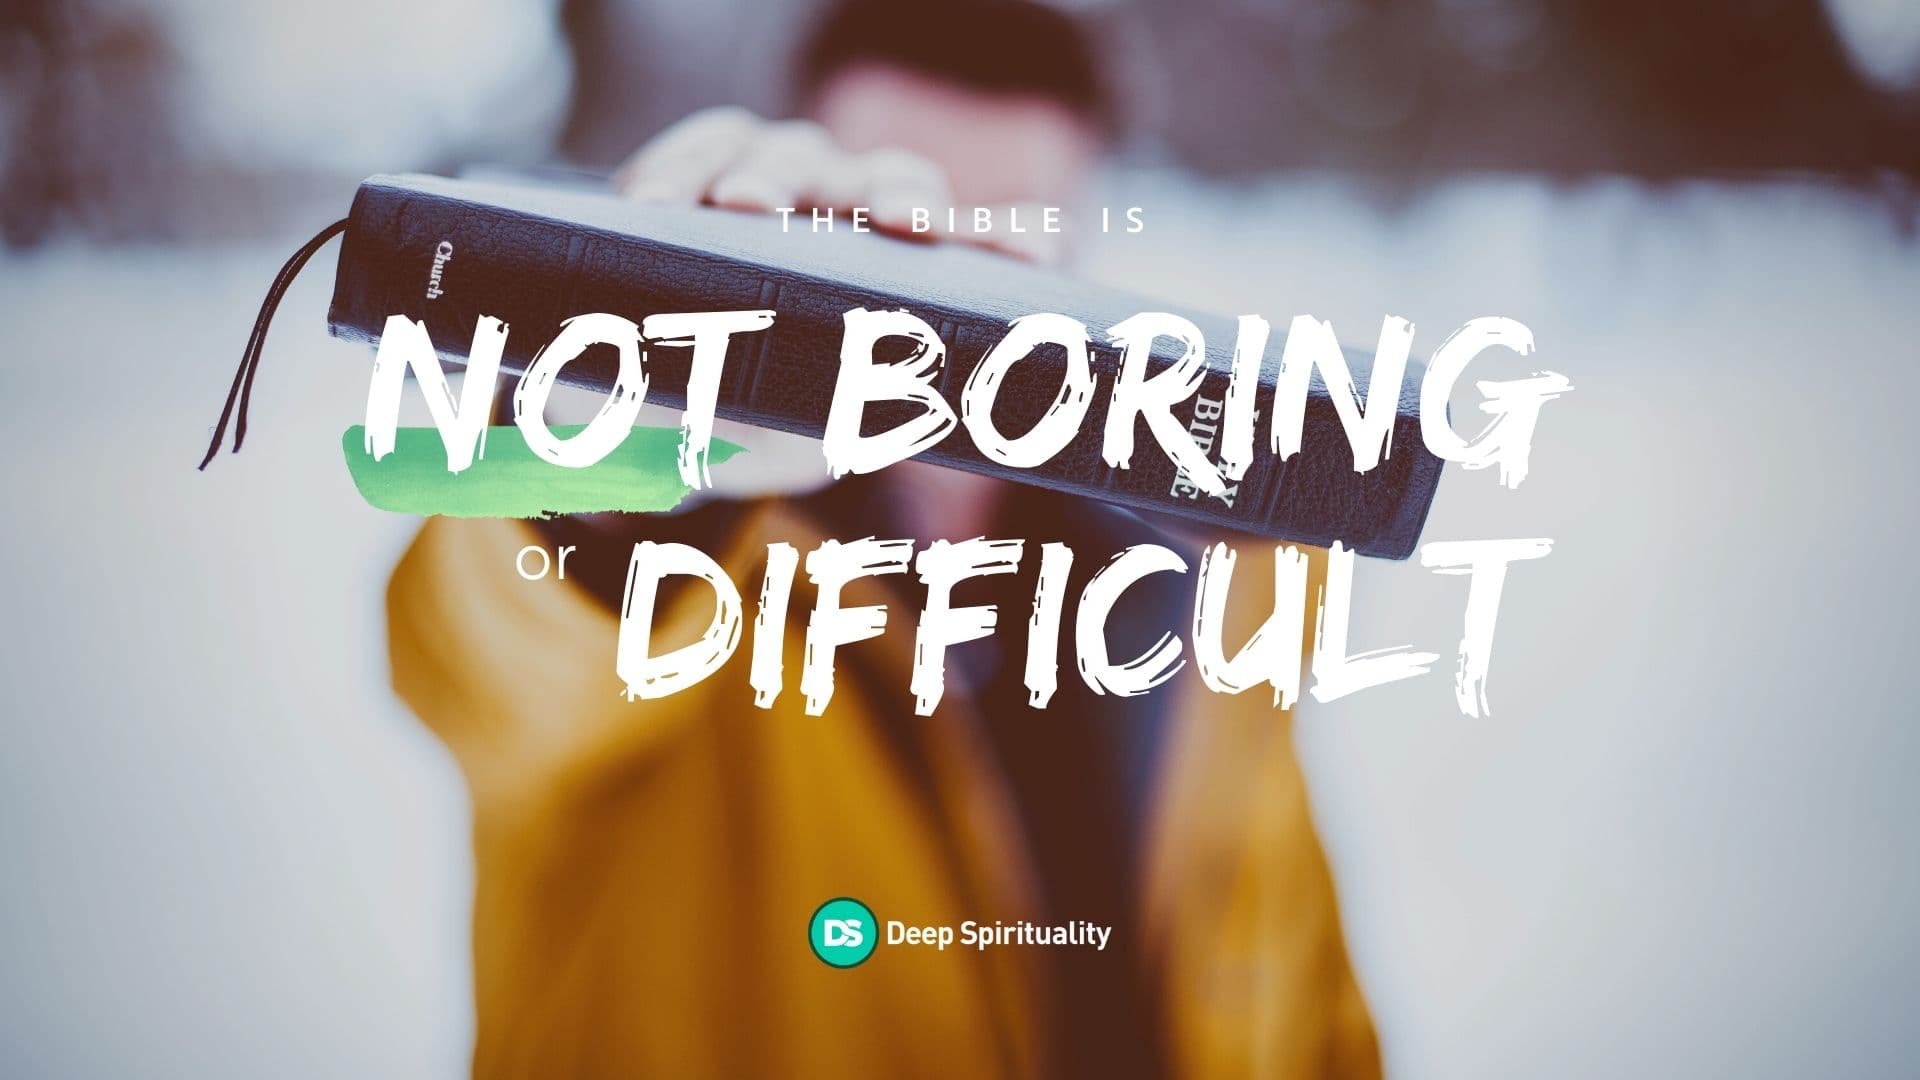 the bible is not boring or difficult